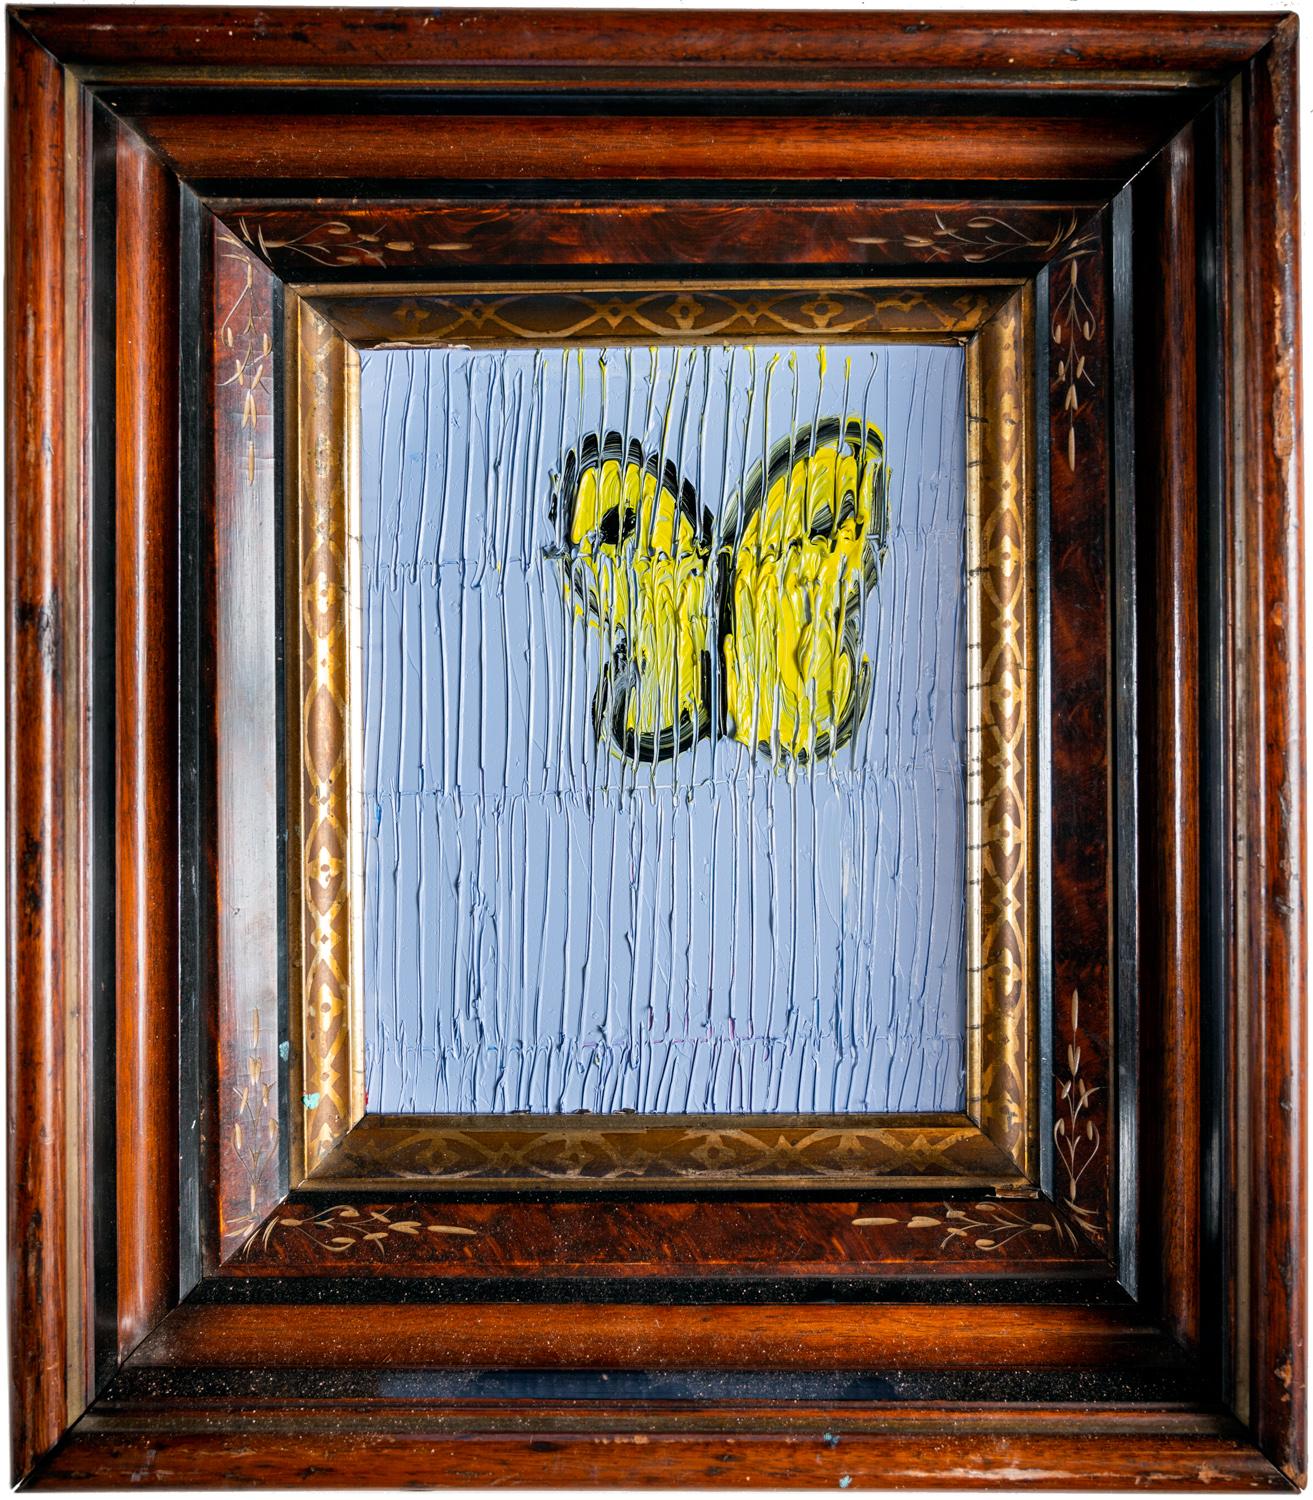 Hunt Slonem Figurative Painting - Single "Butterfly Painting" Original Oil Painting in Ornate Vintage Frame